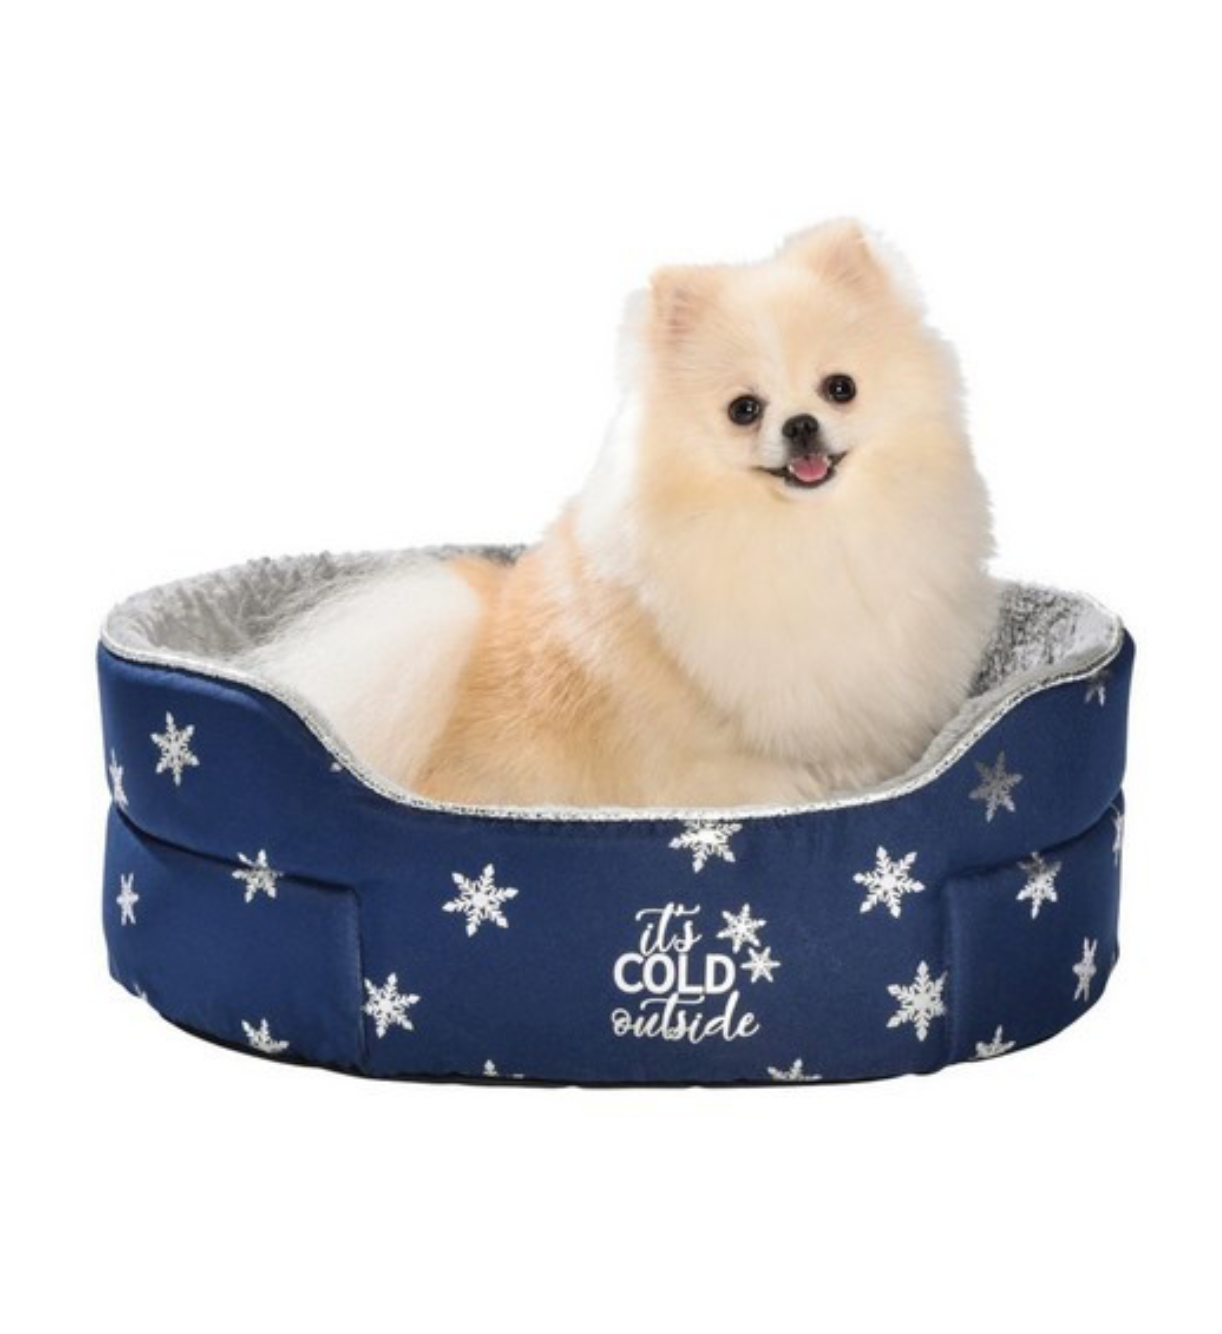 Bobby Corbeille Snowflake Pet Bed in Blue